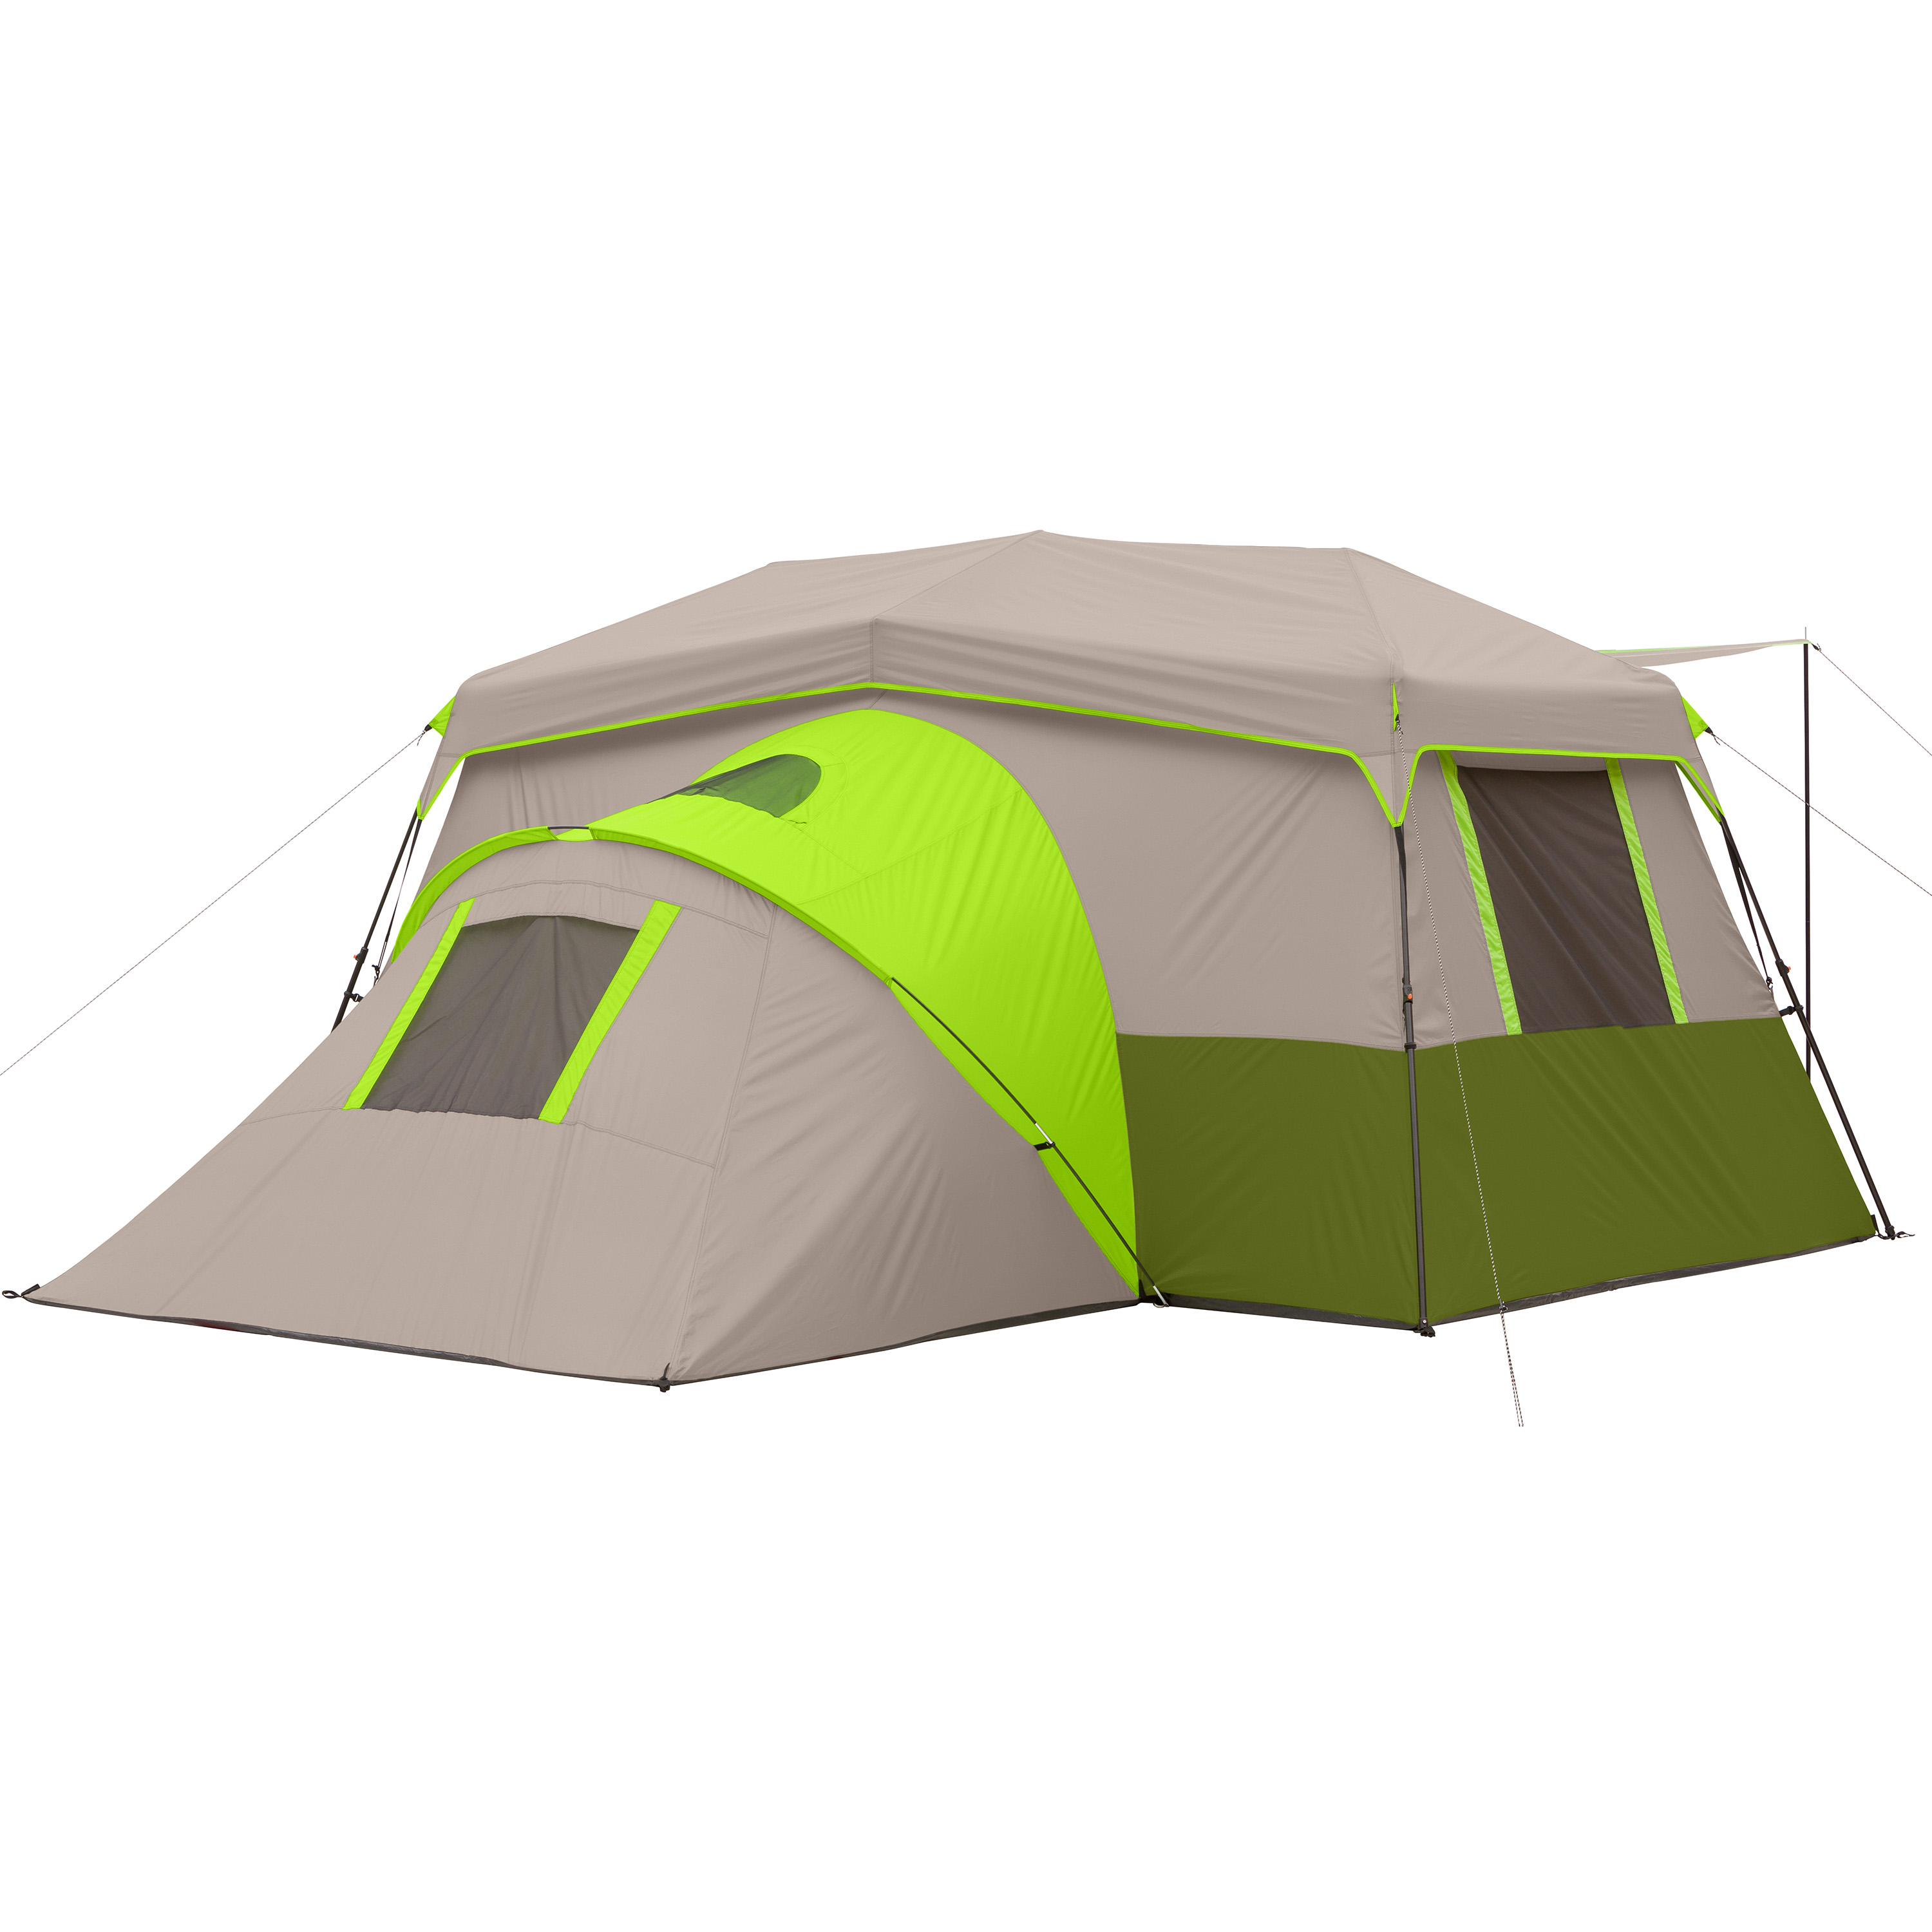 Ozark Trail 11-Person Instant Cabin Tent with Private Room - image 4 of 8